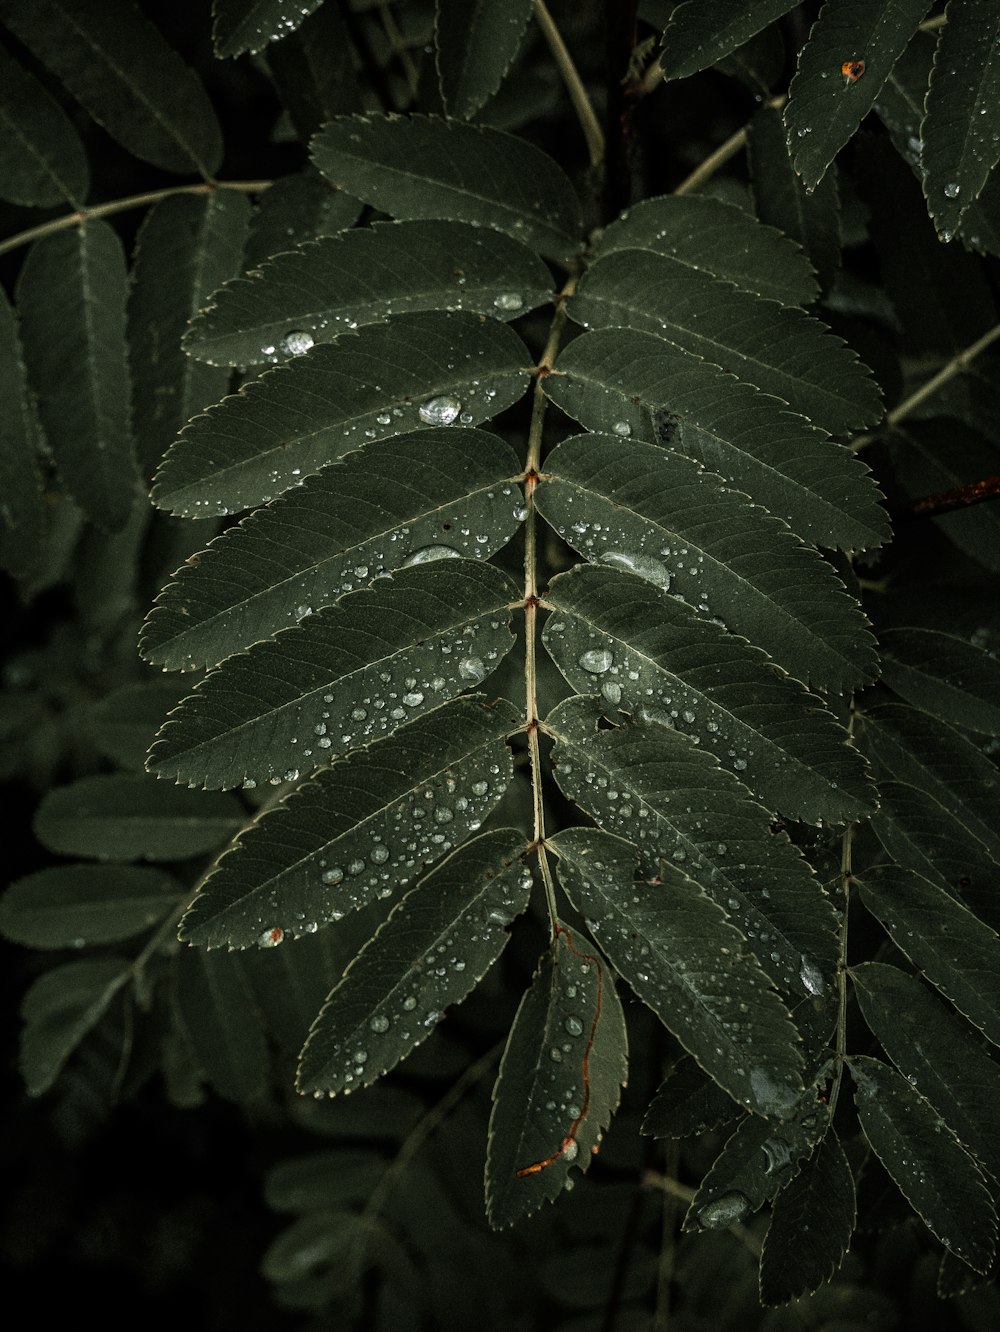 green and brown leaves with water droplets